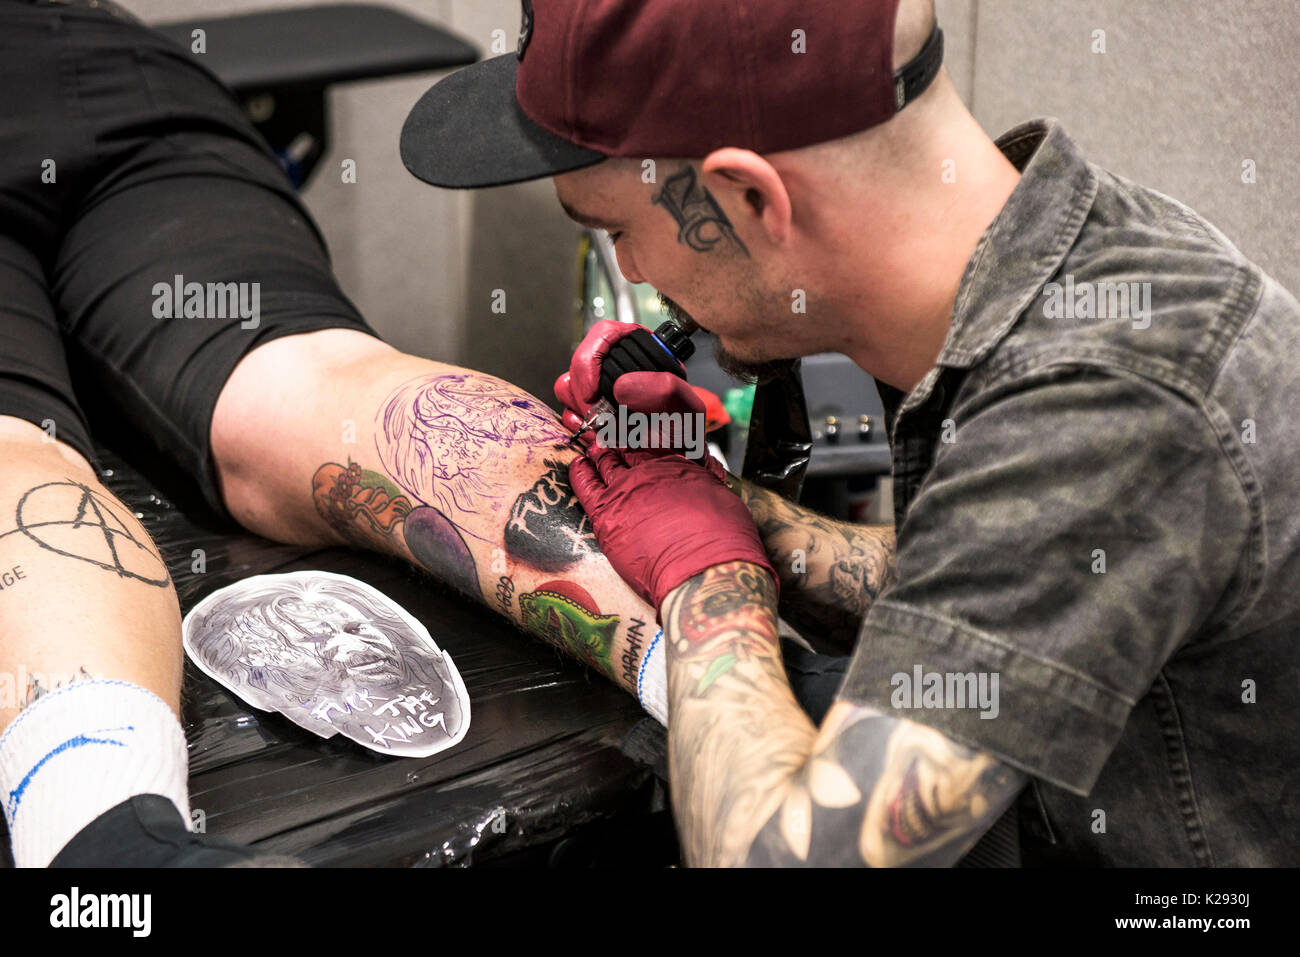 Cornwall Tattoo Convention - a closeup view of Josh Docksey tattooing the leg of a customer at the Cornwall Tattoo Convention Stock Photo - Alamy